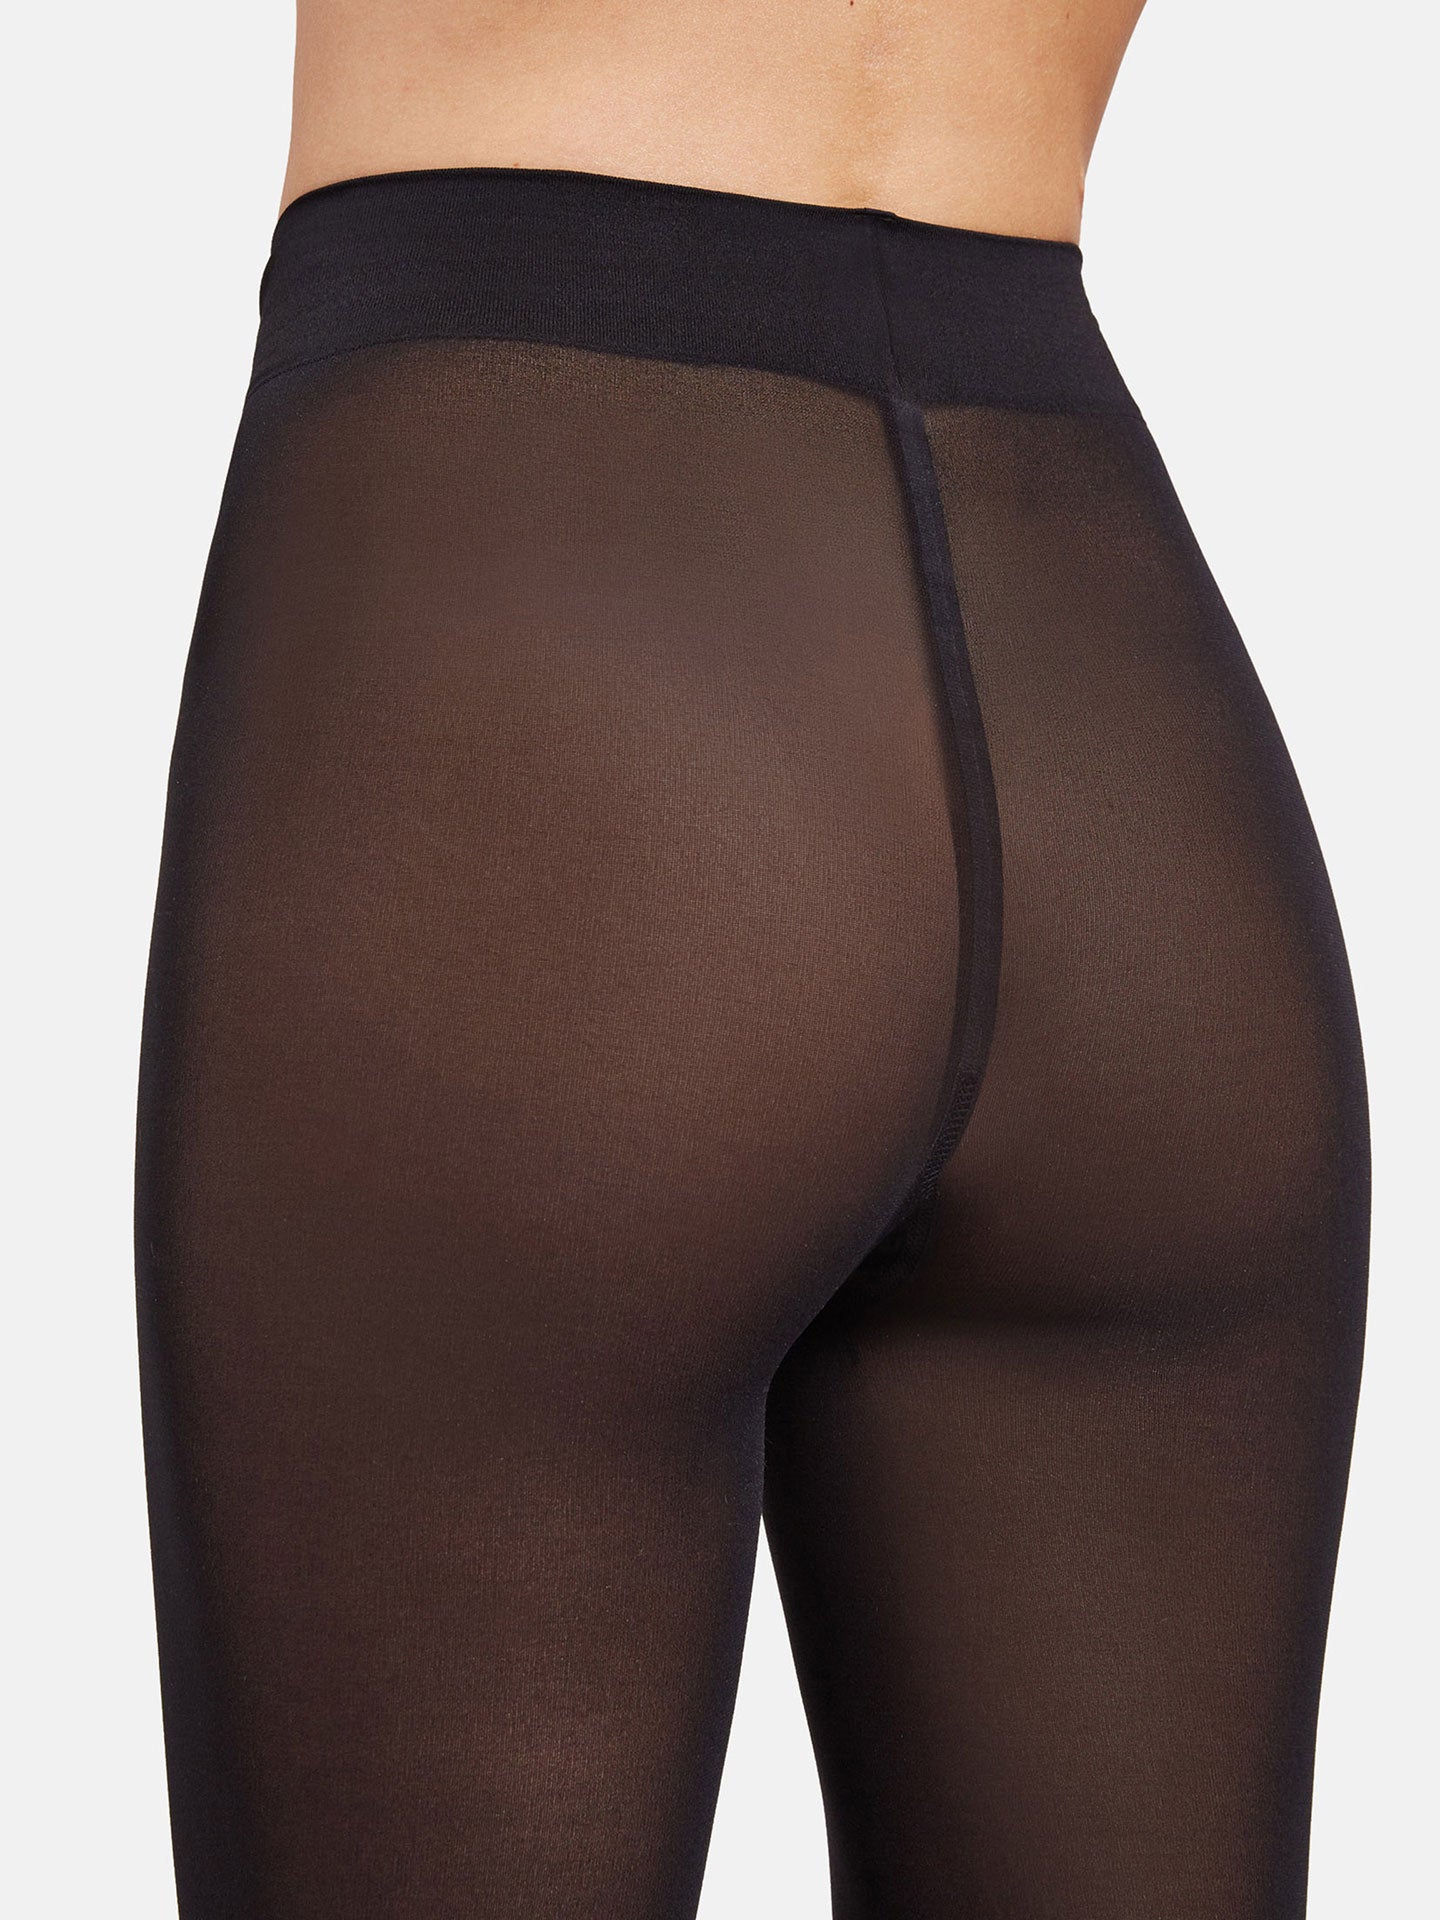 Black Wolford Pure 50 Tights